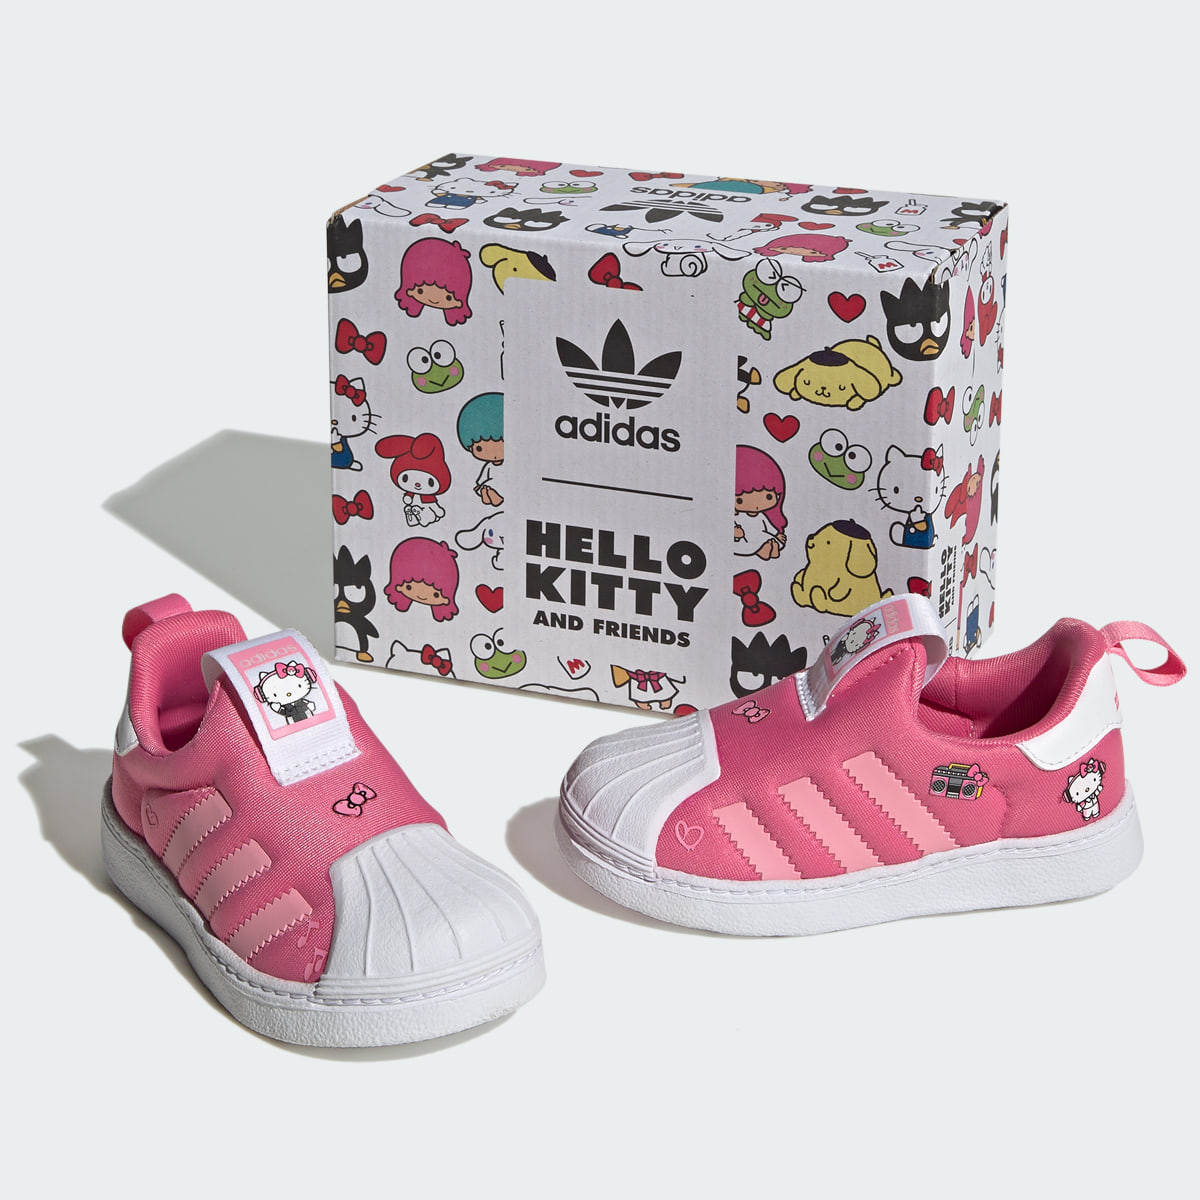 Adidas Originals x Hello Kitty and Friends Superstar 360 Shoes Kids. 8